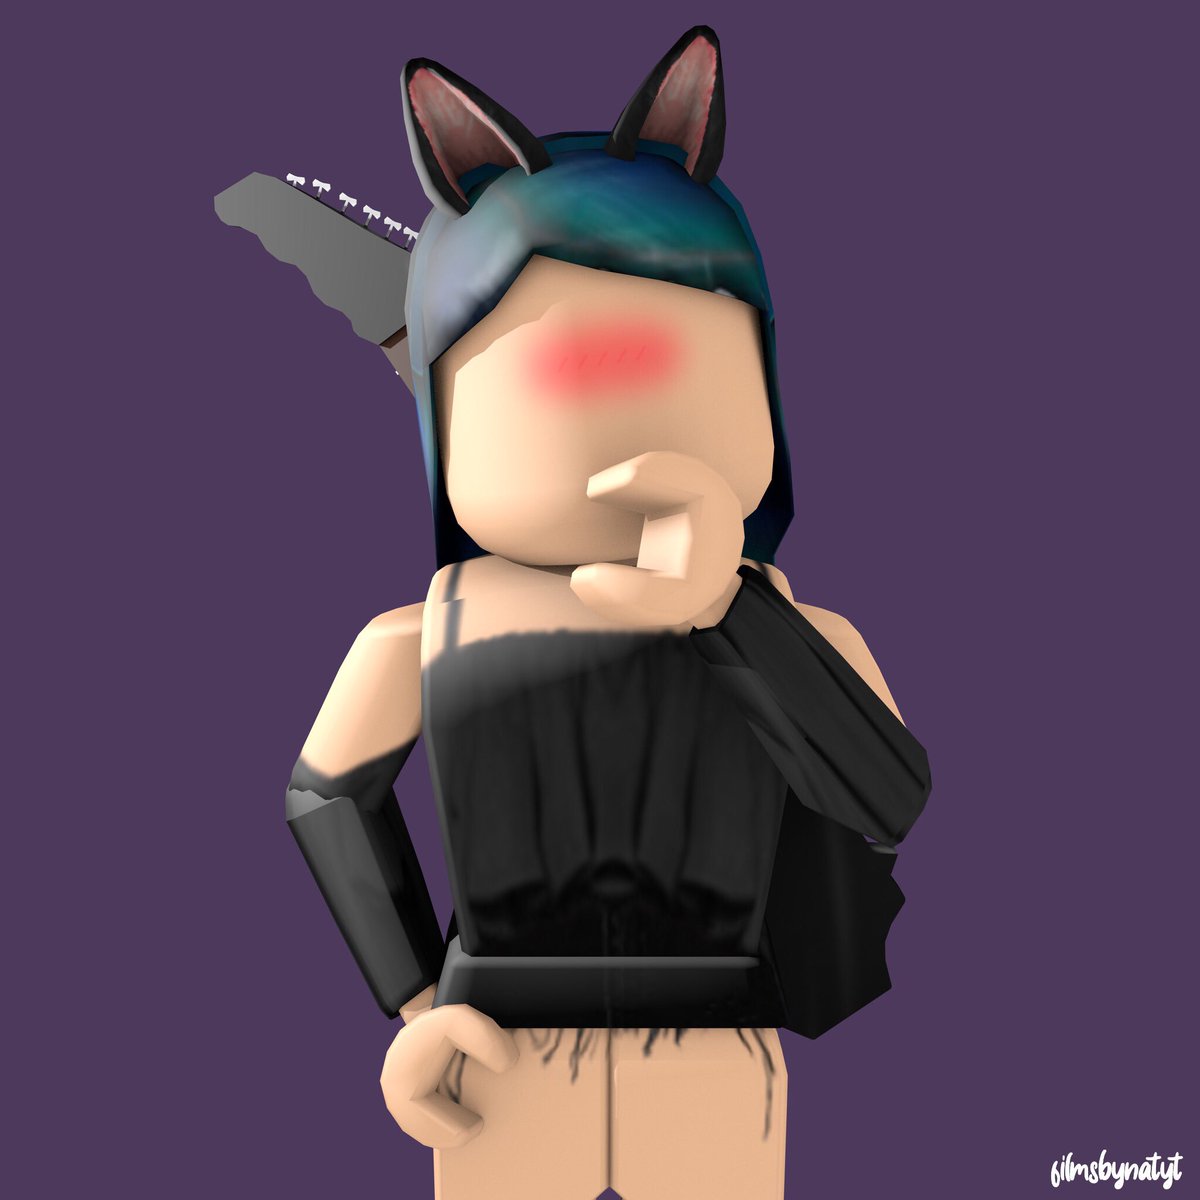 Natasha On Twitter Hello Since It S Almost Halloween I Want To Do A Gfx Raffle Thing Lol Anyways One Person For Every Day Of October Will Get A Free Gfx Relating To - roblox profile pictures for halloween